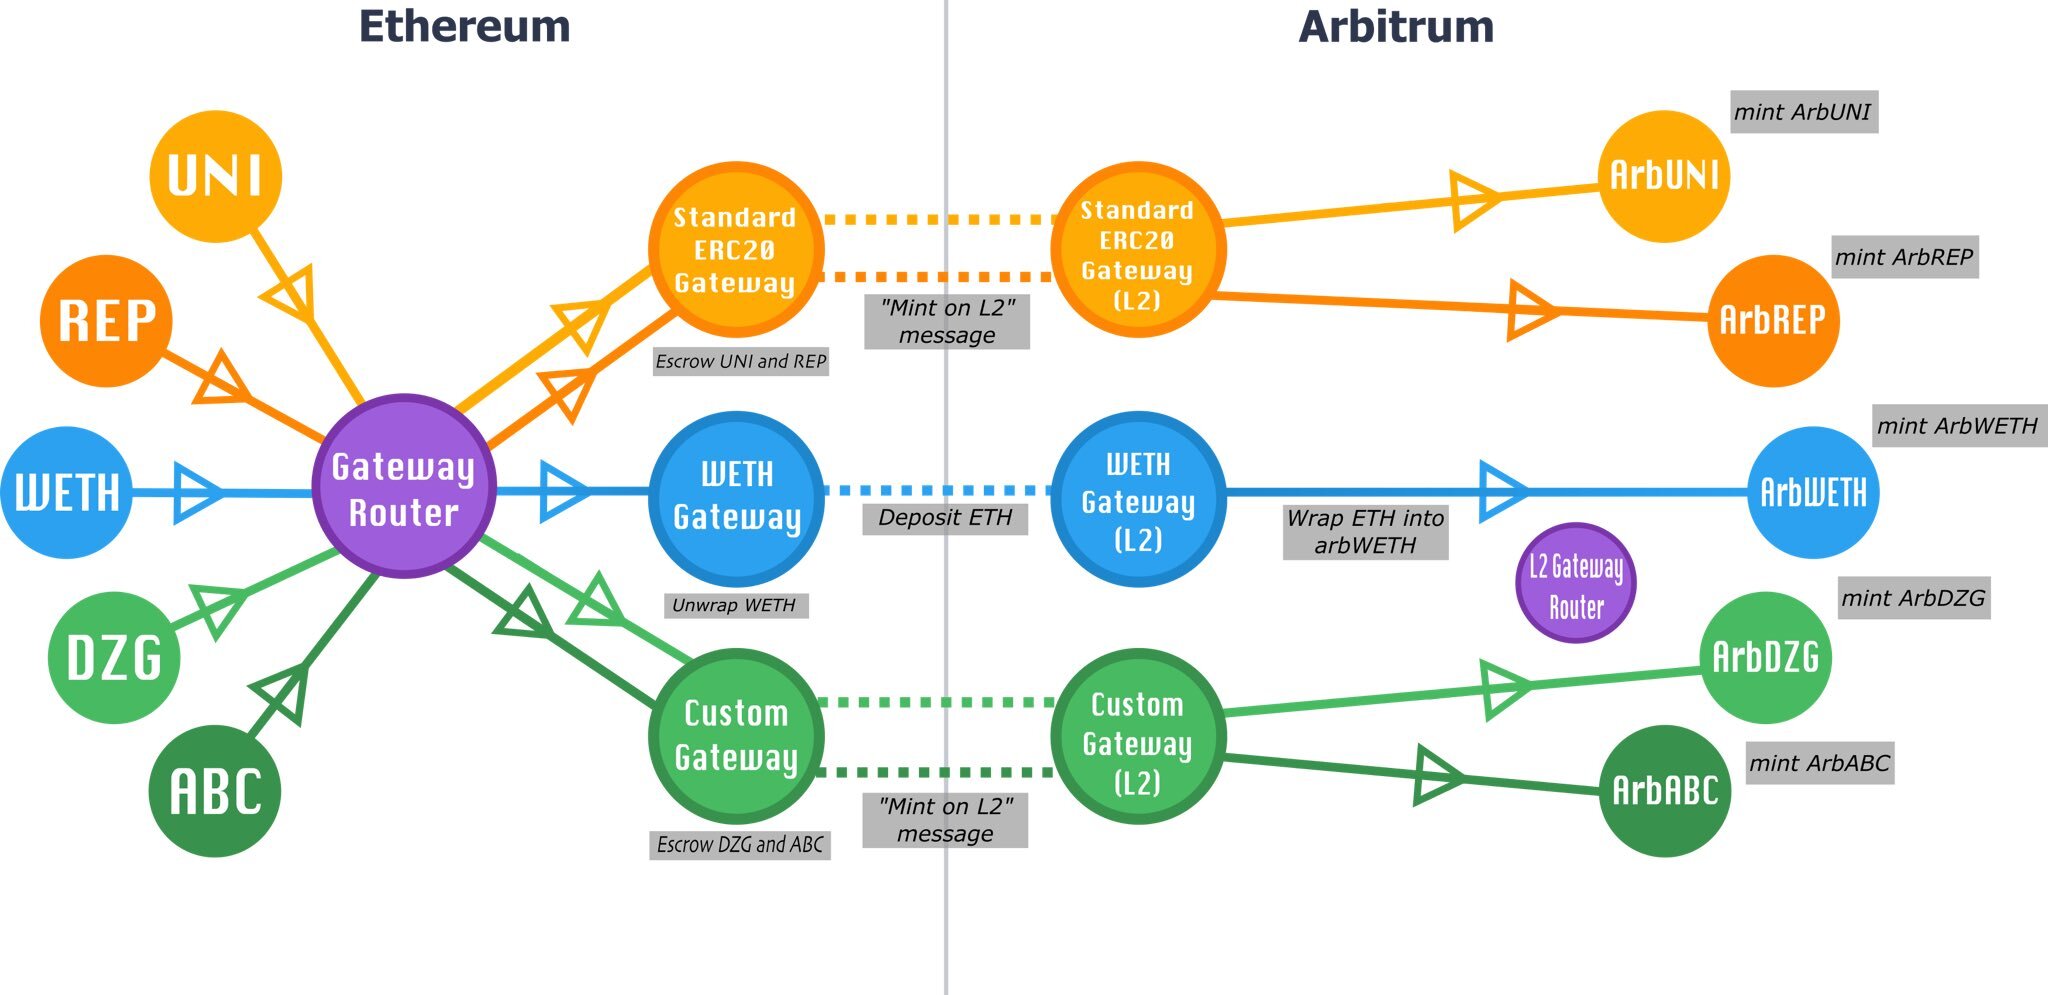 Use Cases for the Arbitrum Token